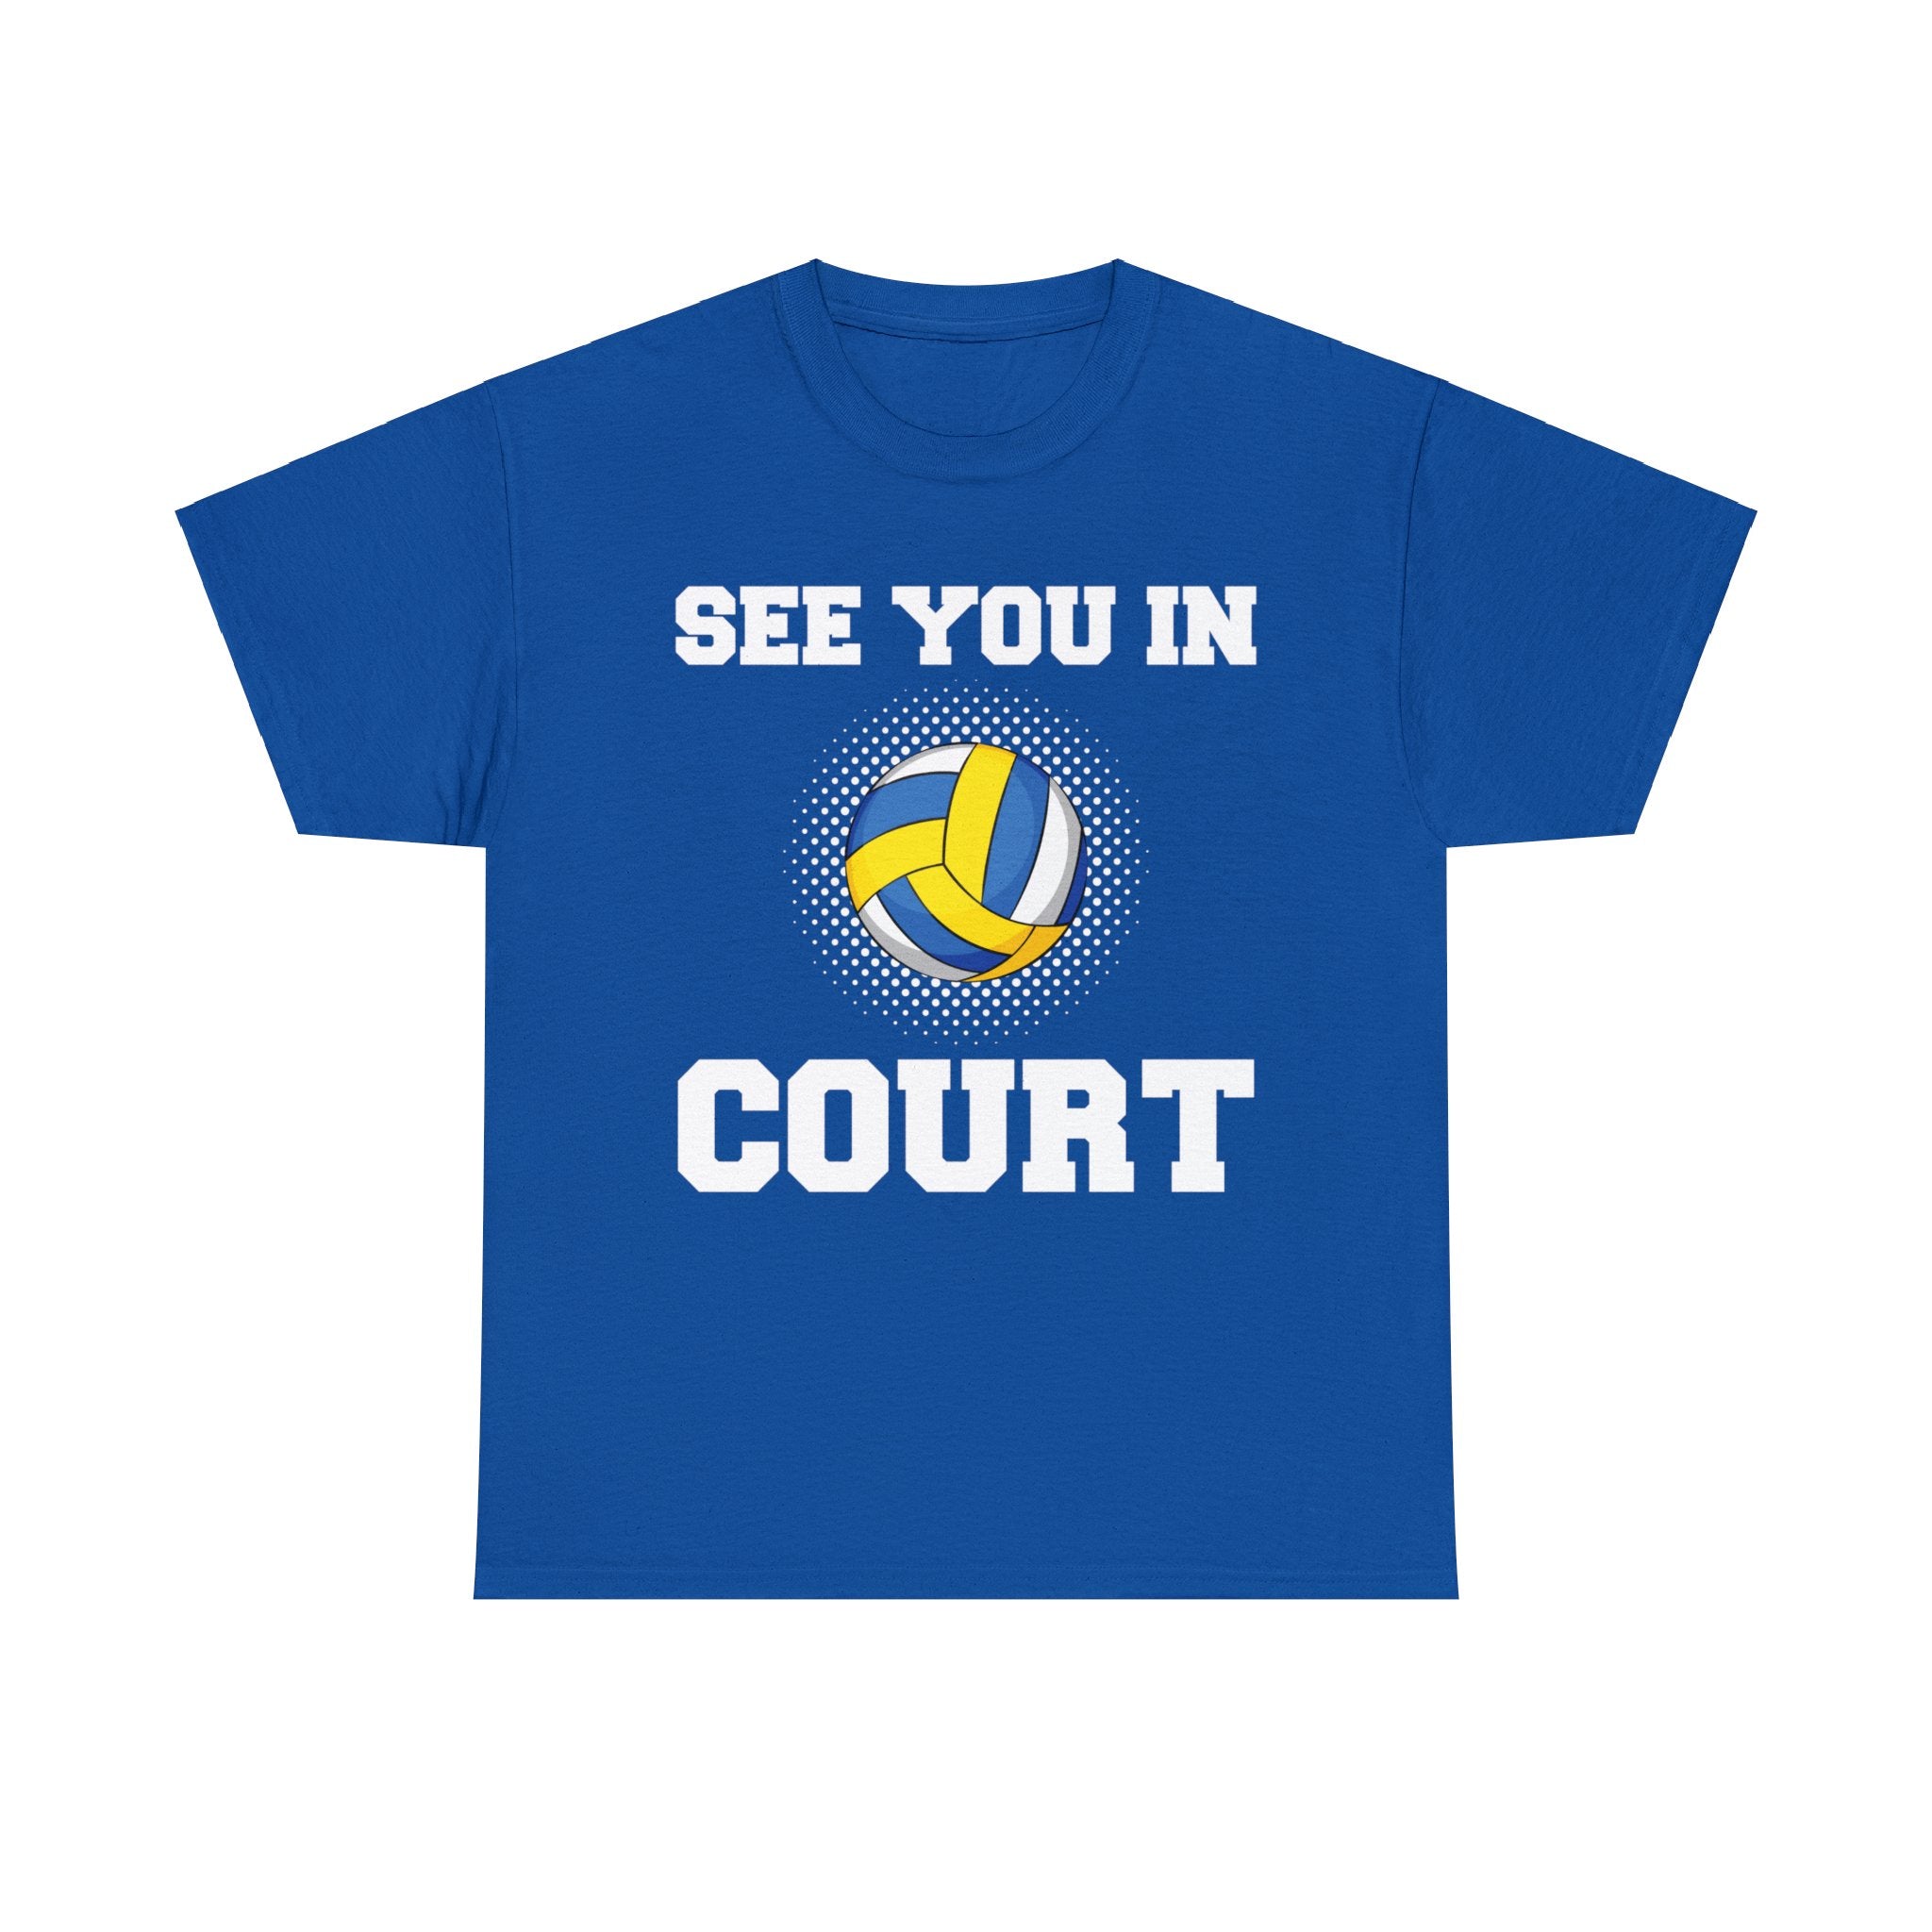 See You in Court Tee